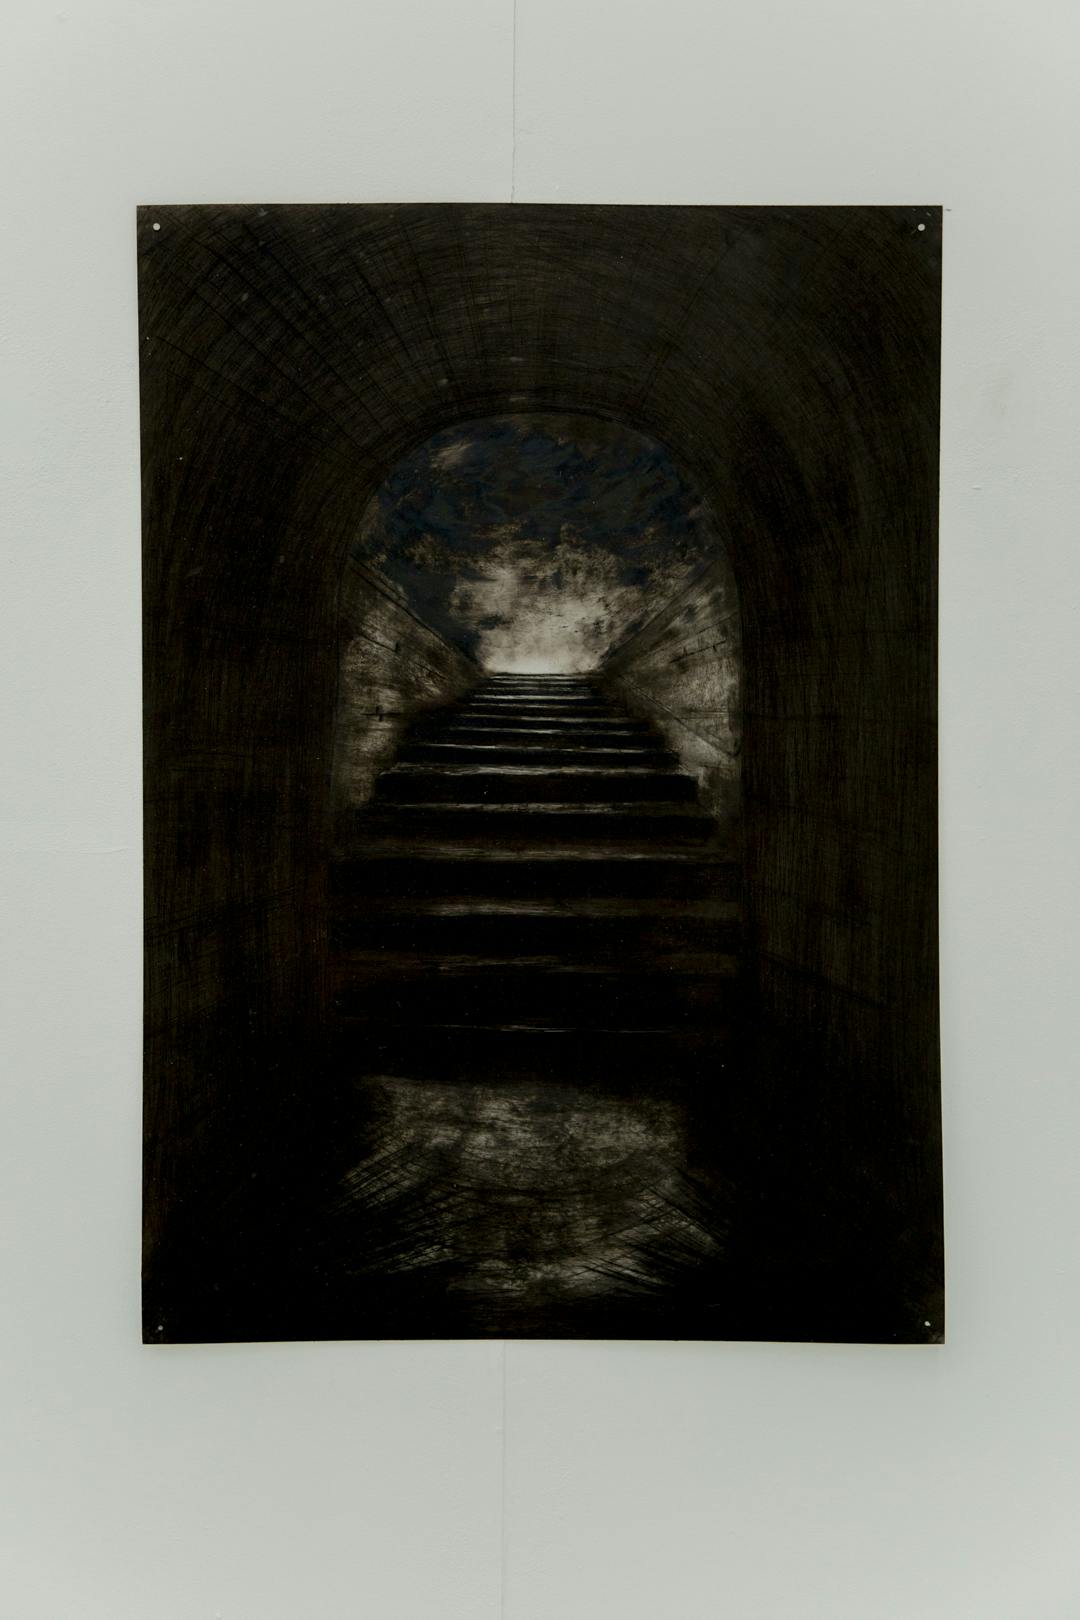 Image shows a framed shot of Yazmine's image of a black and white/grey scale tunnel or archway with some stairs behind it.